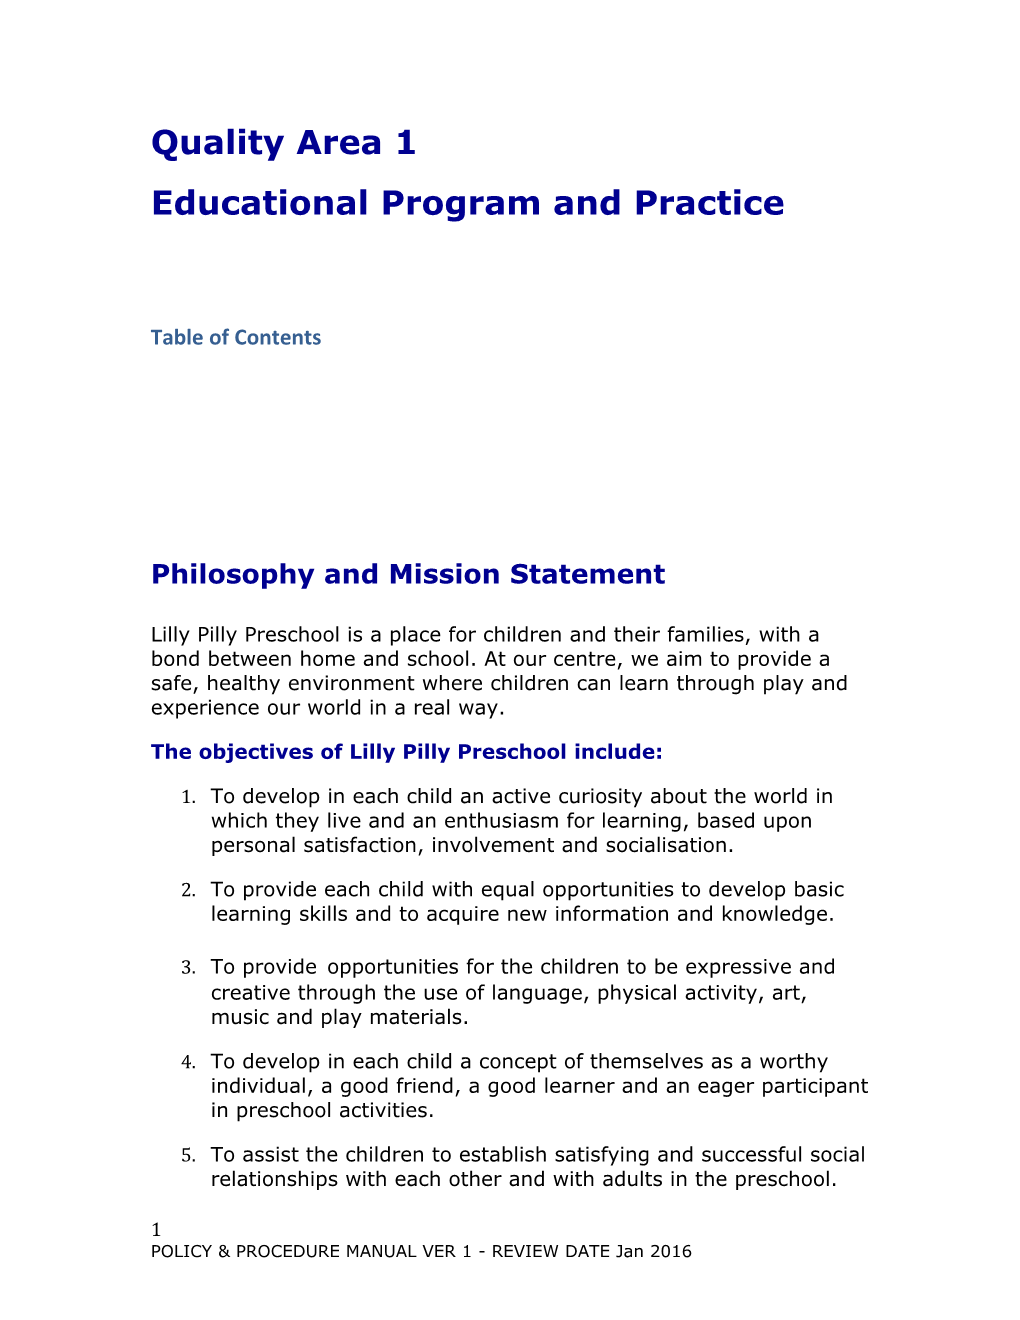 Educational Program and Practice